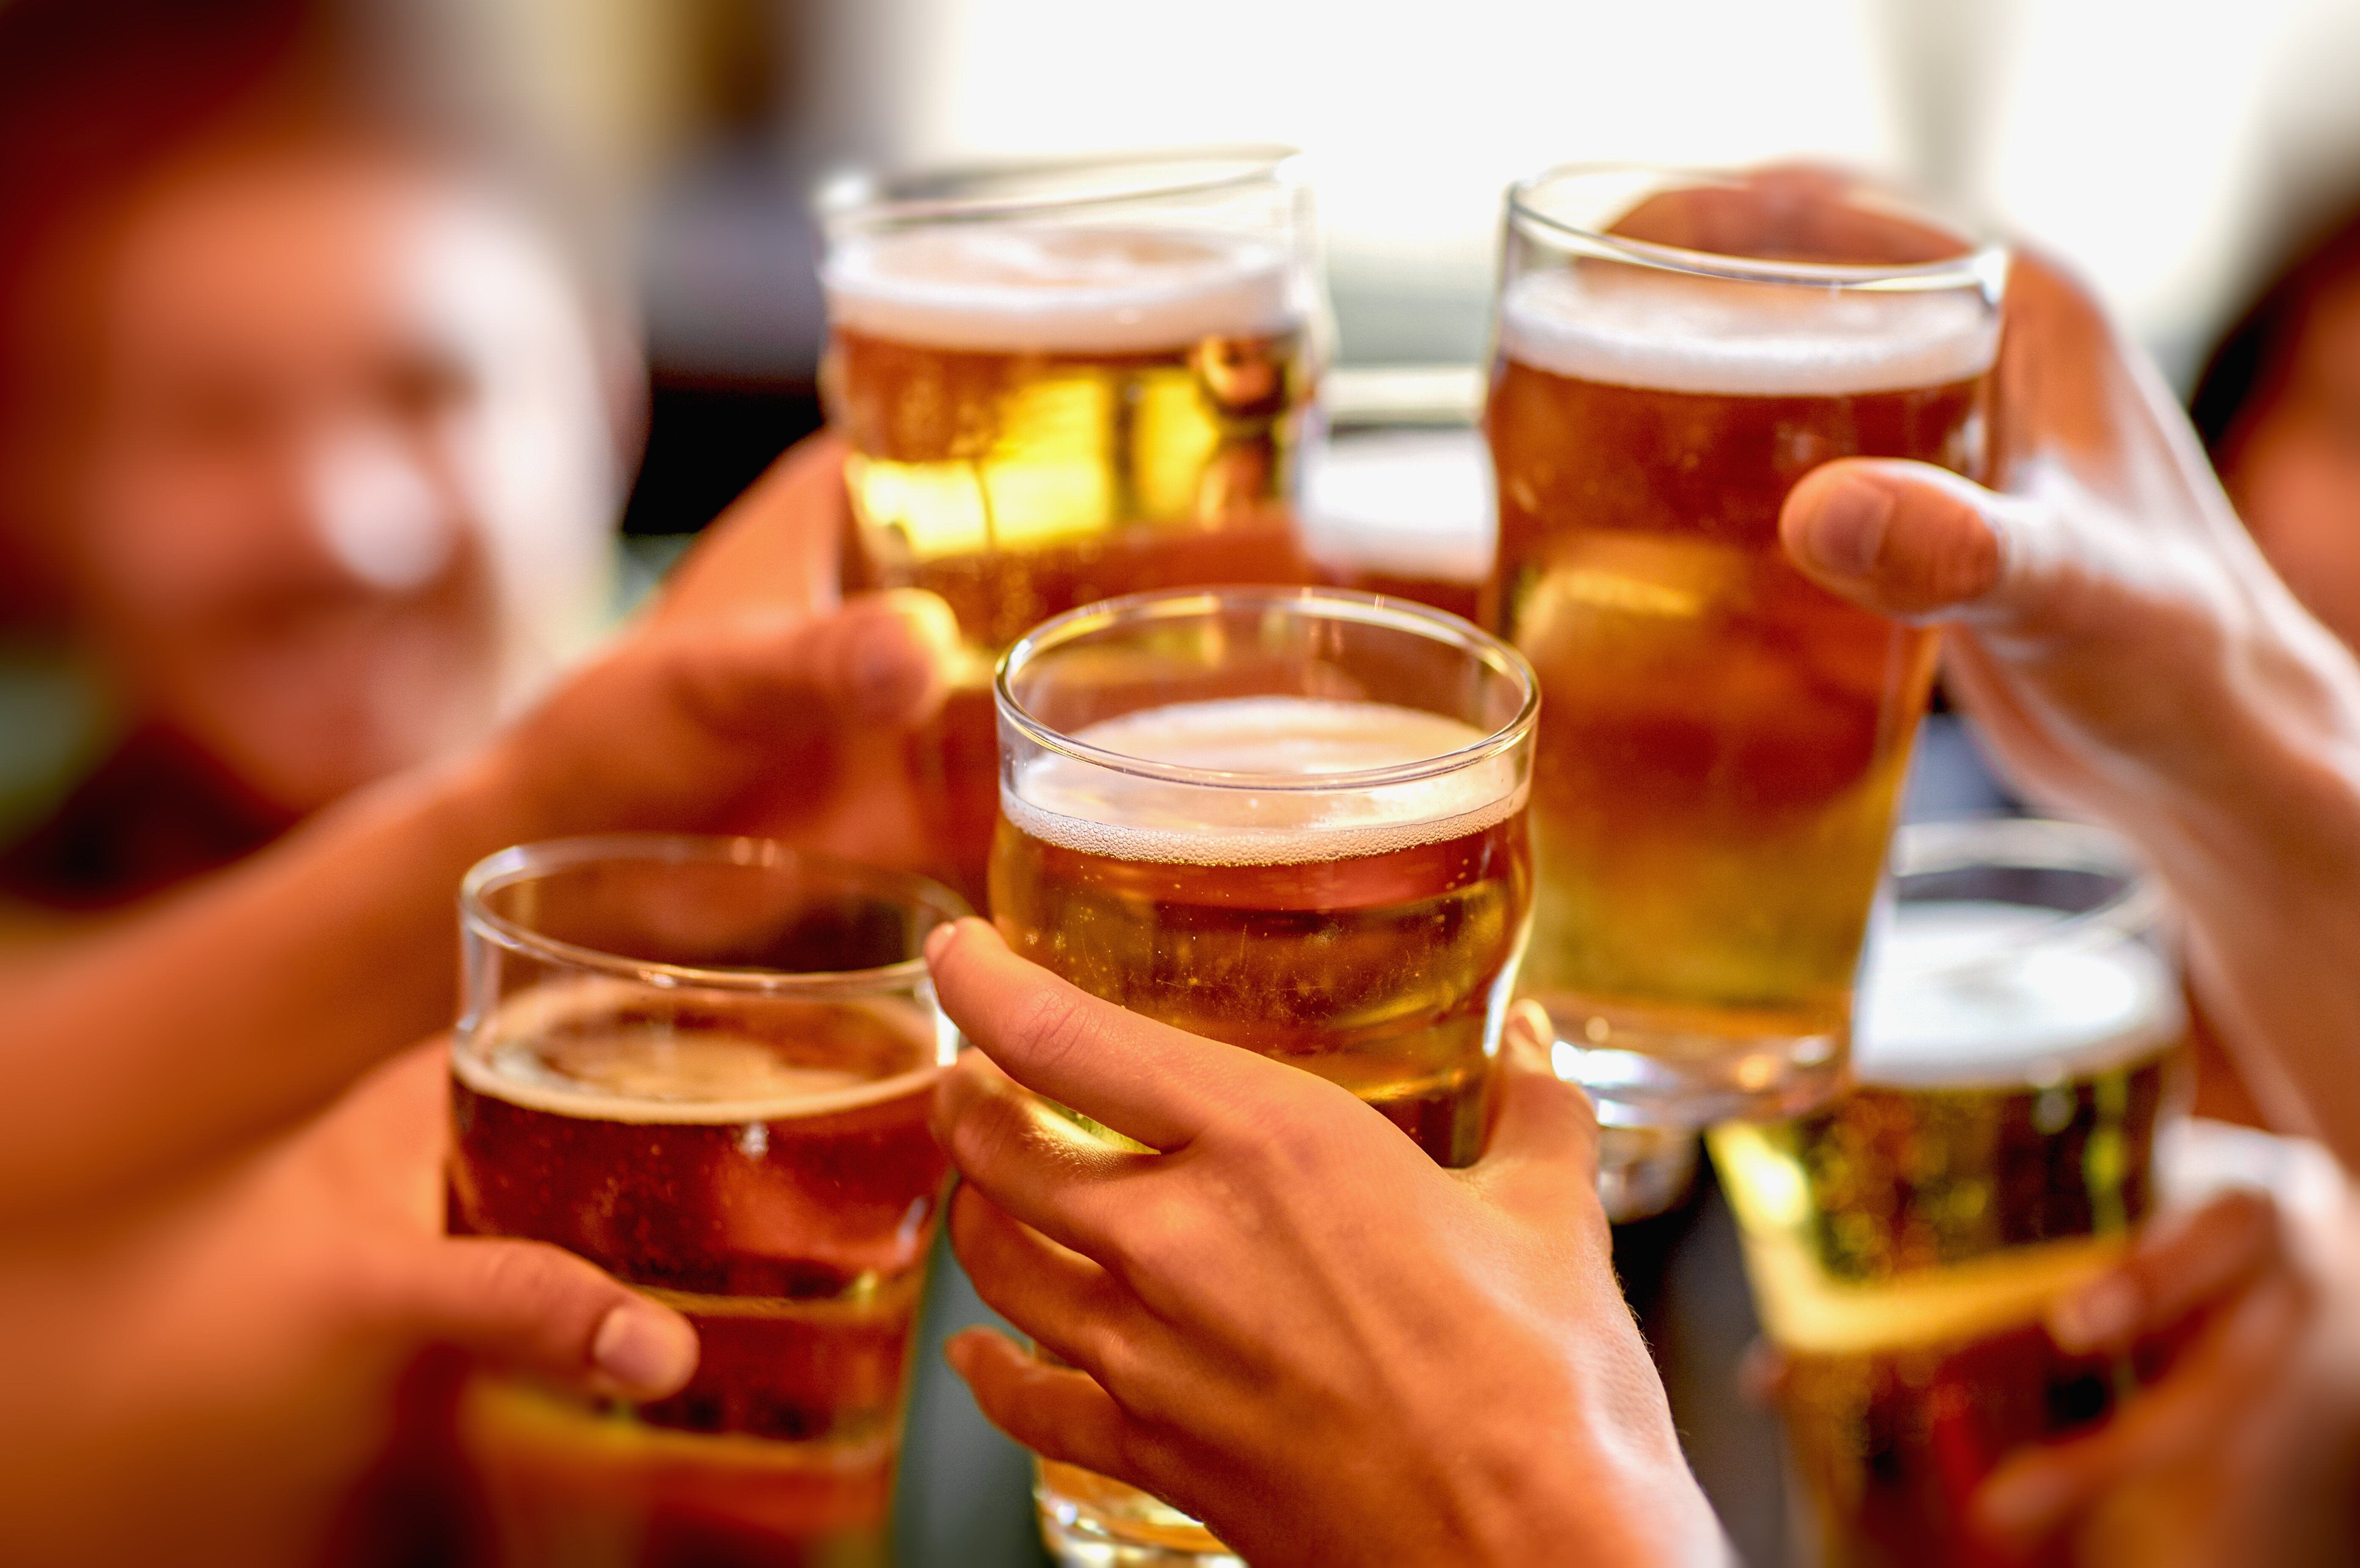 Union warns of ‘summer beer drought’ as brewery workers support strike